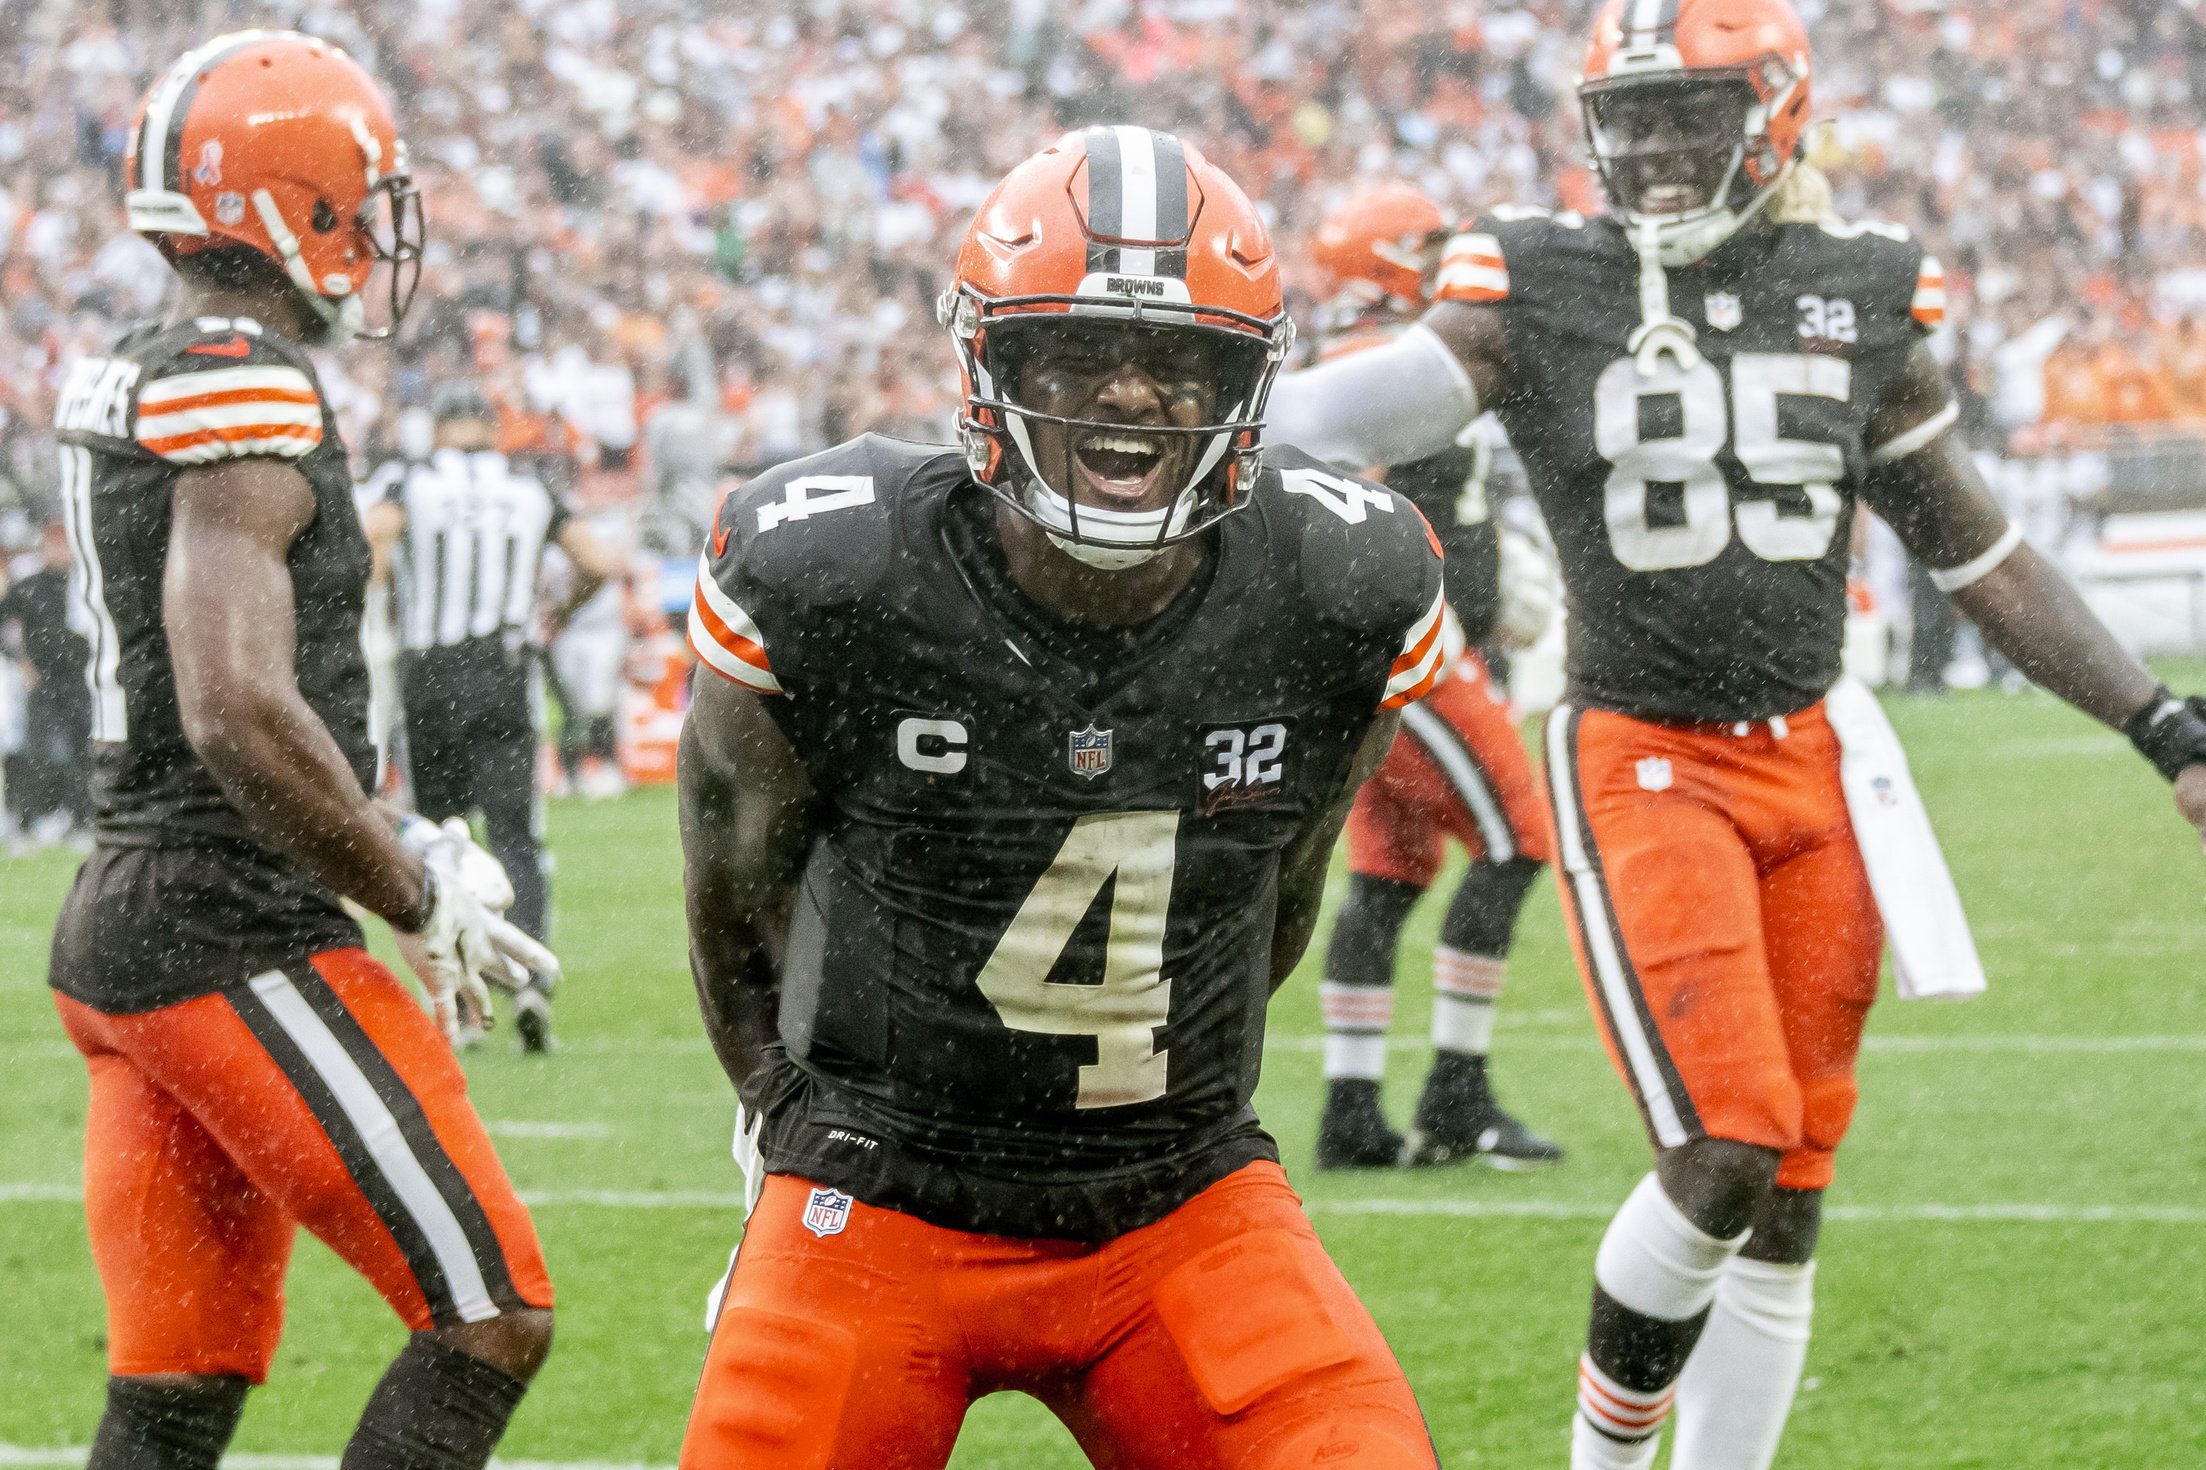 Deshaun Watson (4) celebrates after scoring a two point conversion during the second half against the Cincinnati Bengals at Cleveland Browns Stadium.